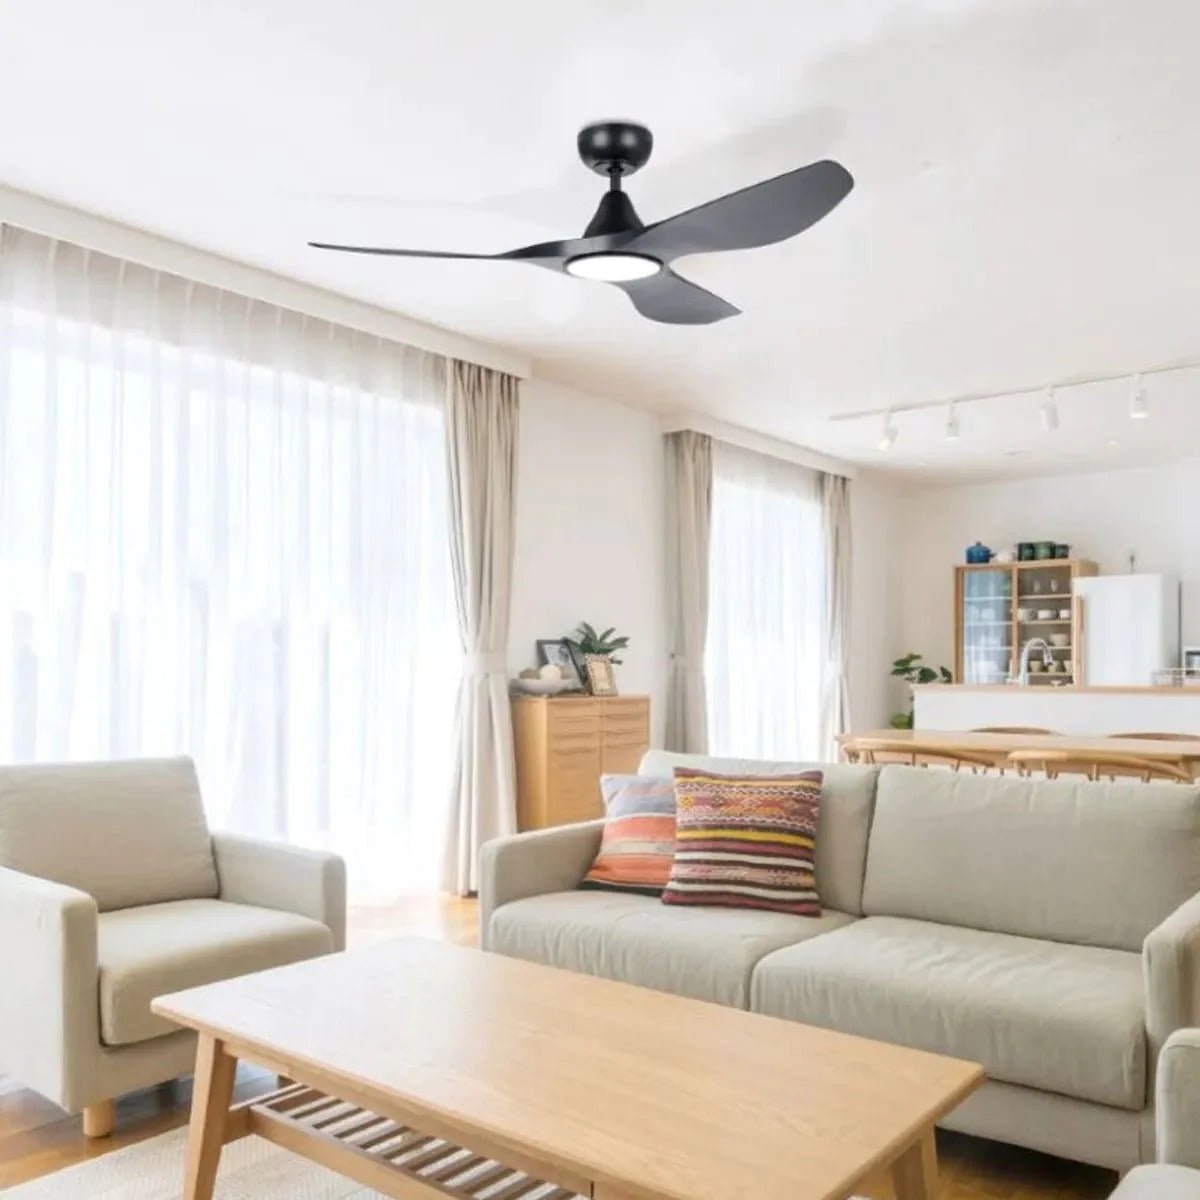 Eglo Surf 60" DC WiFi Ceiling Fan with LED Light & Remote Control - Mases LightingEglo